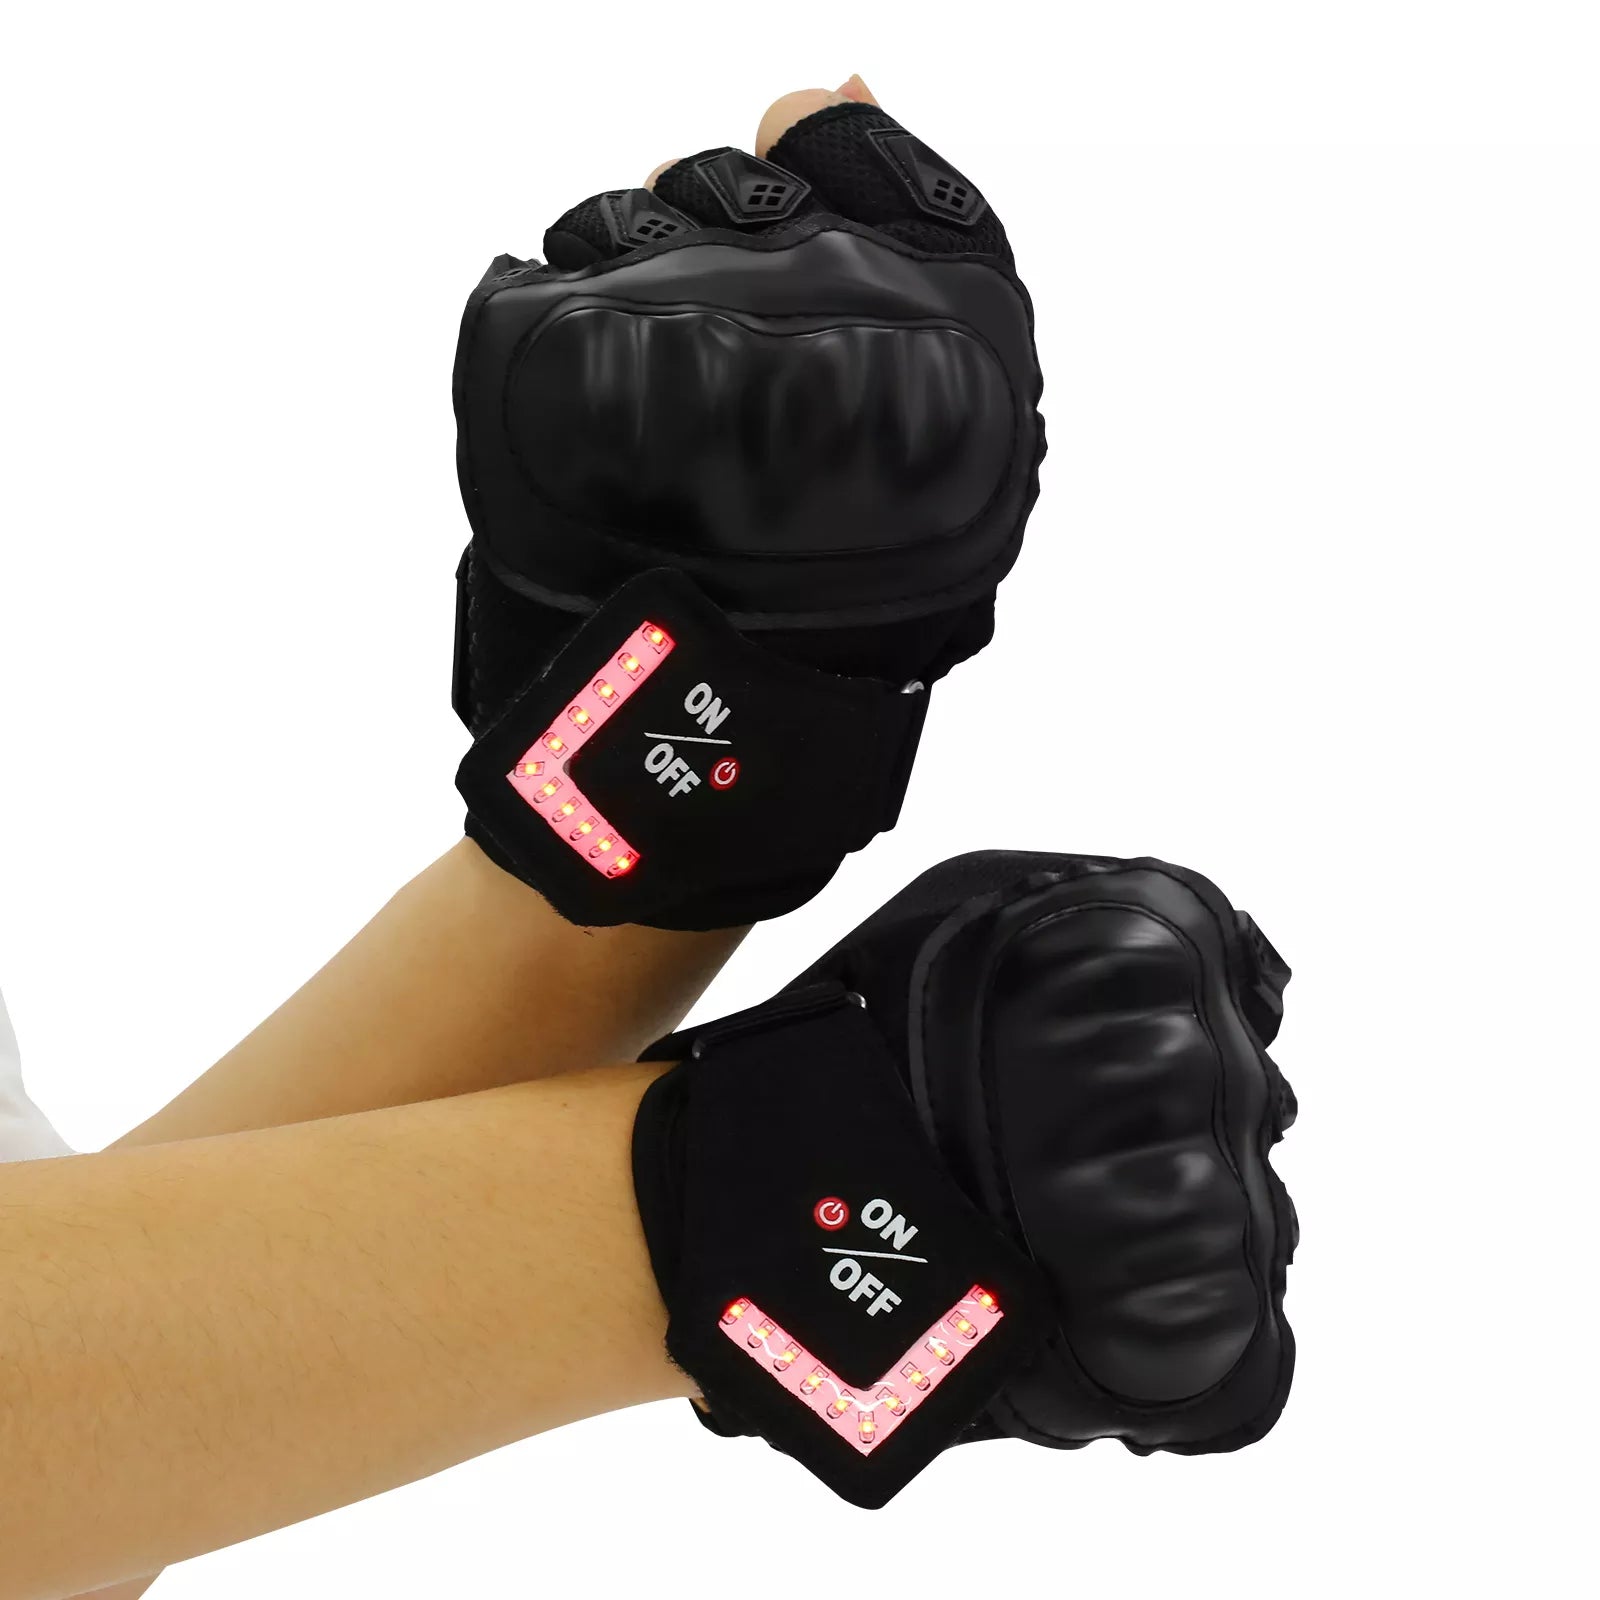 vanpowers Introducing automatic induction cycling electric bicycle knitted gloves. These gloves intelligently recognize your turning direction while riding, causing the warning light to flash and alert pedestrians behind you. This feature enhances safety during your ride.